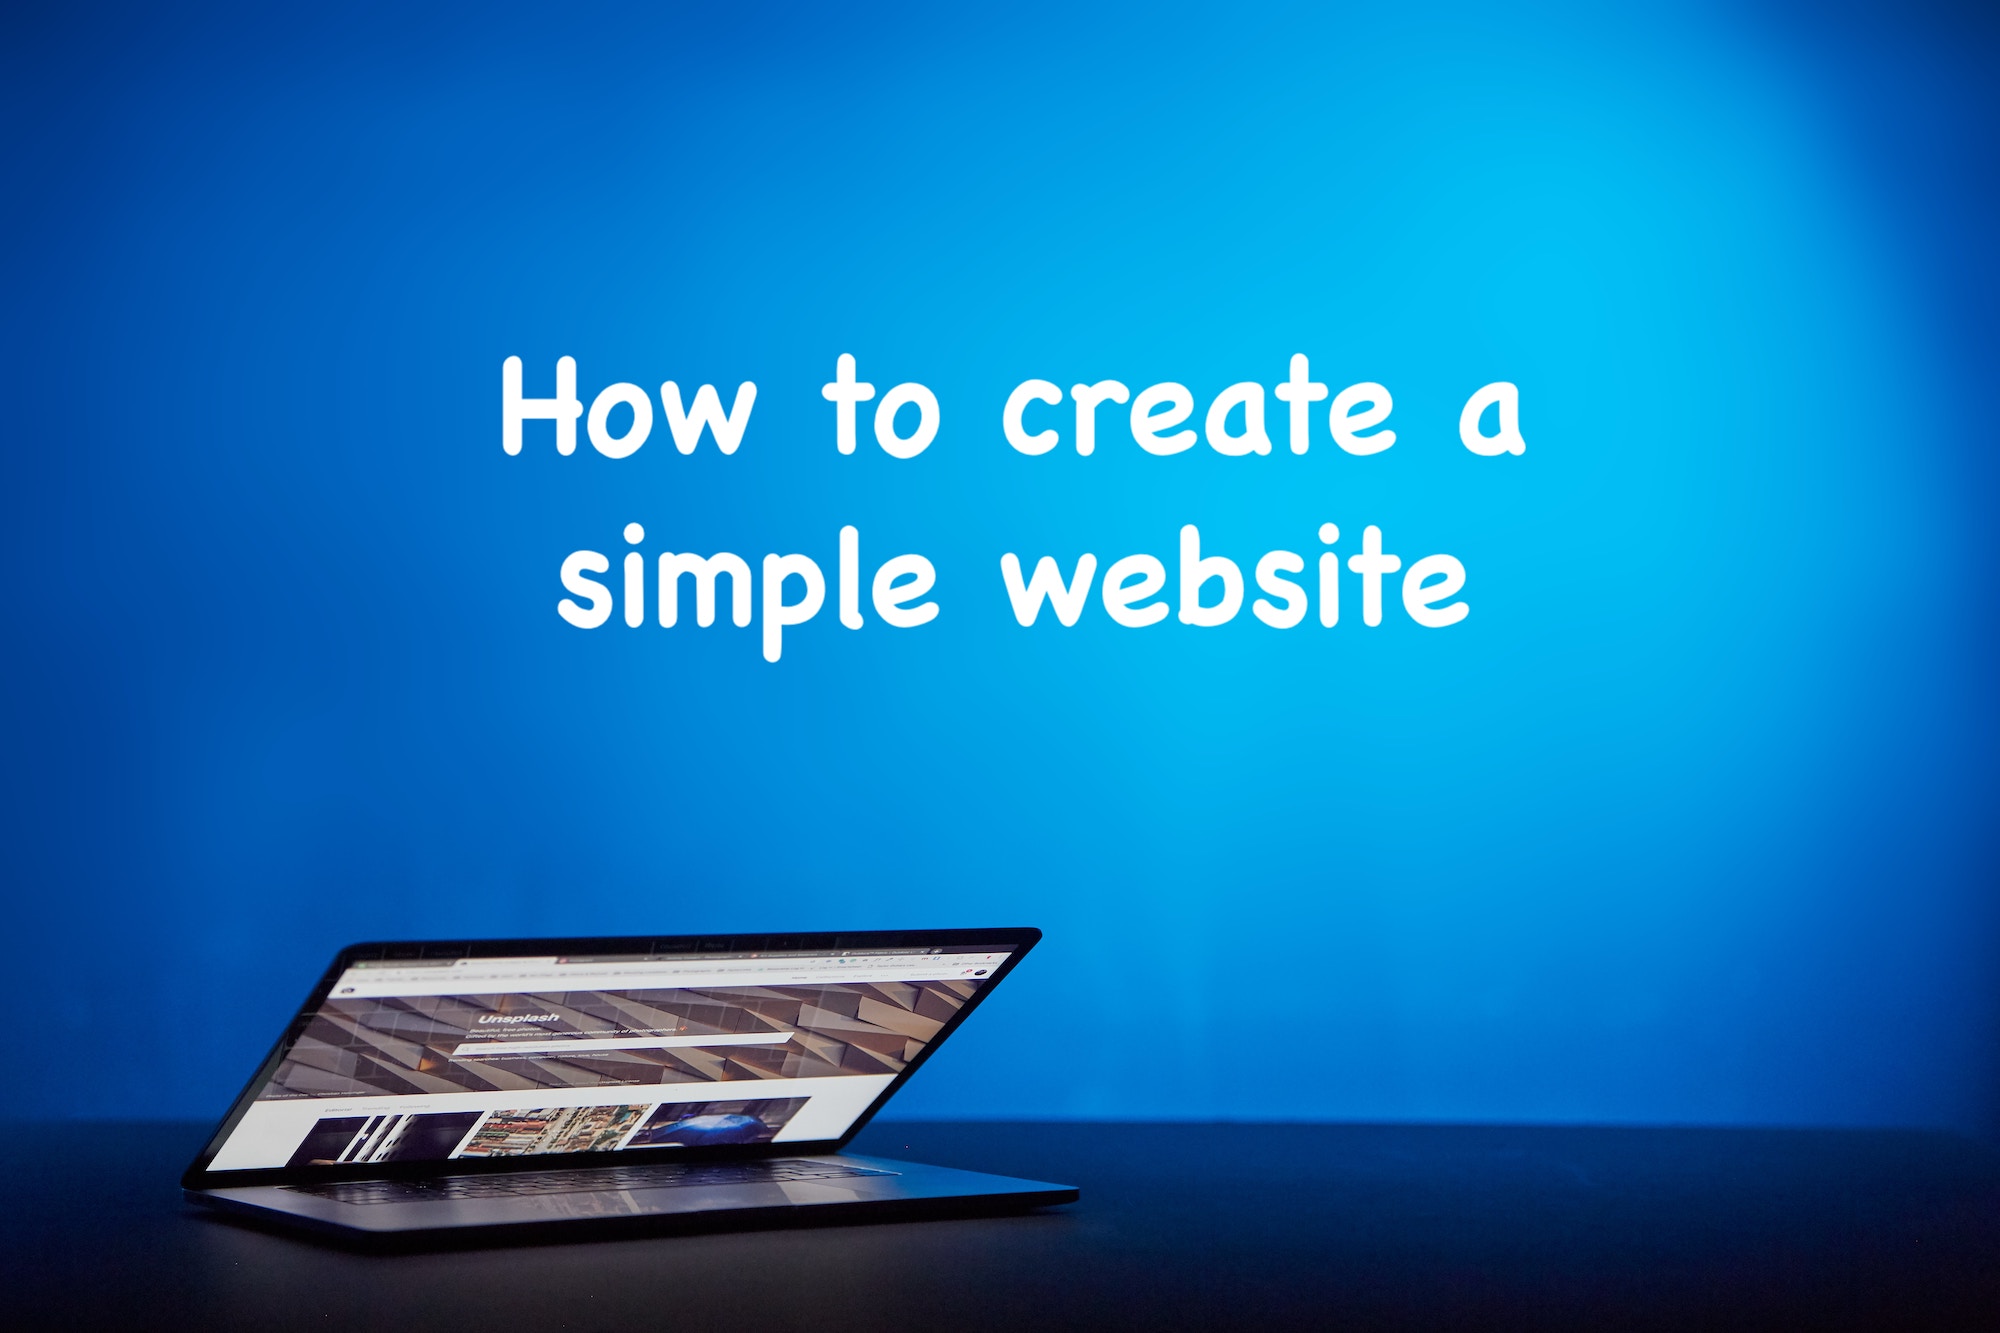 How to create and manage a simple website